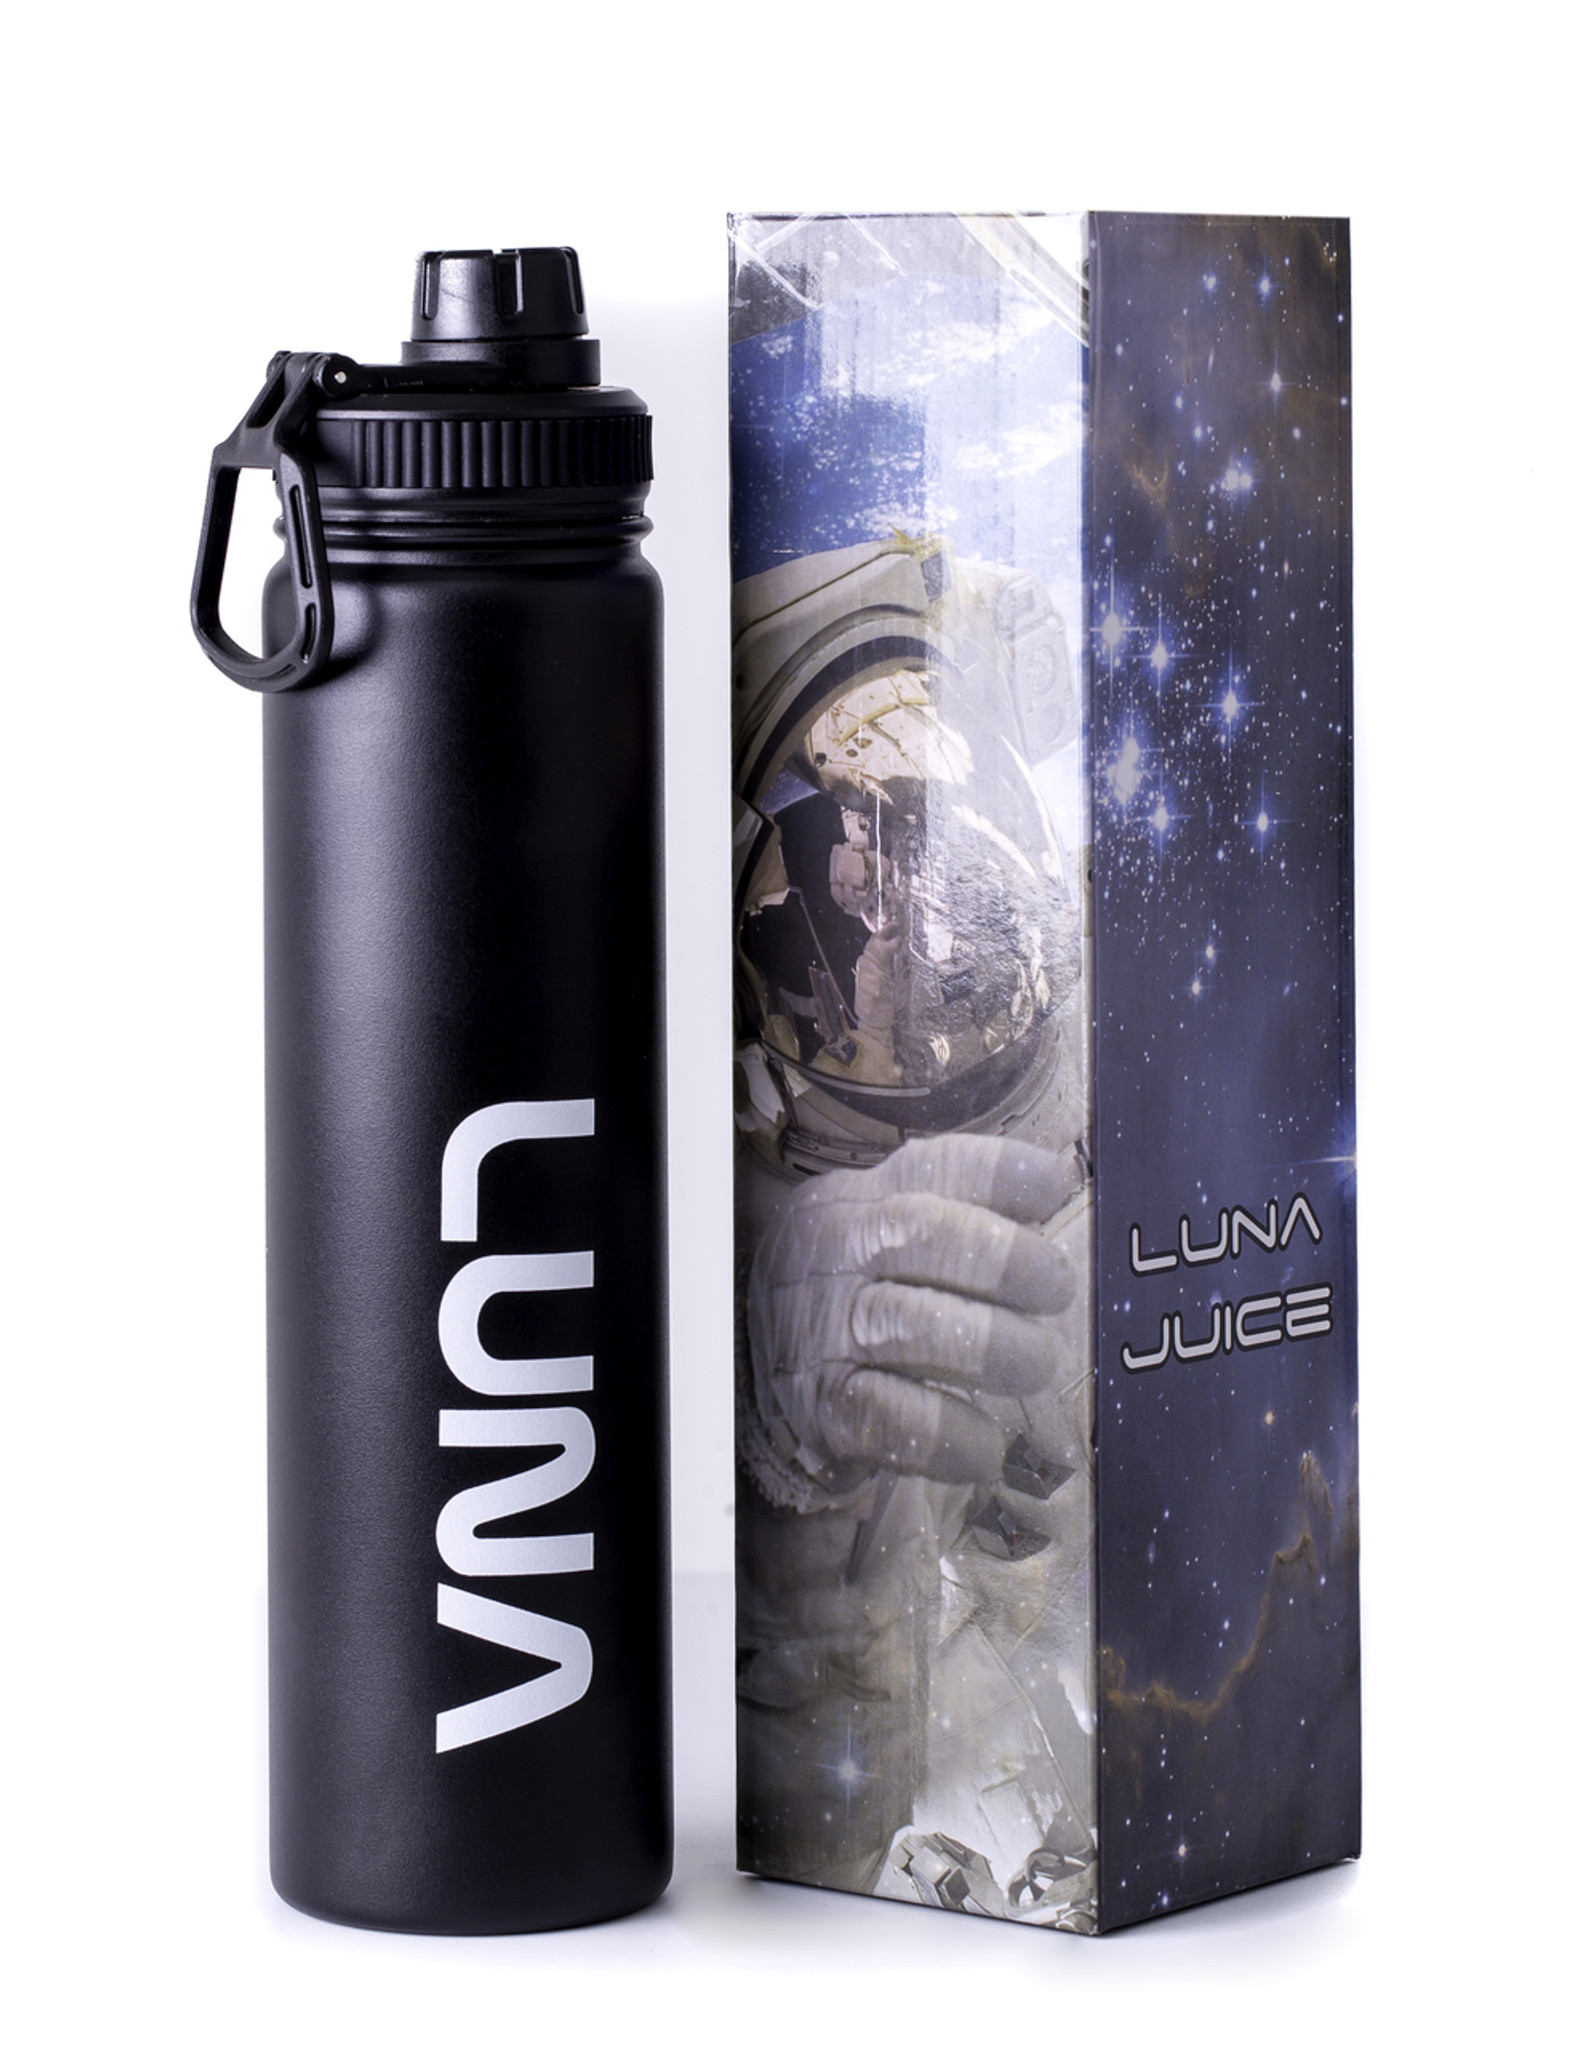 https://cdn11.bigcommerce.com/s-9vkjq73s/images/stencil/2048x2048/products/1625/10020/Luna_Water_Bottle_With_Box__60218.1527647802.jpg?c=2